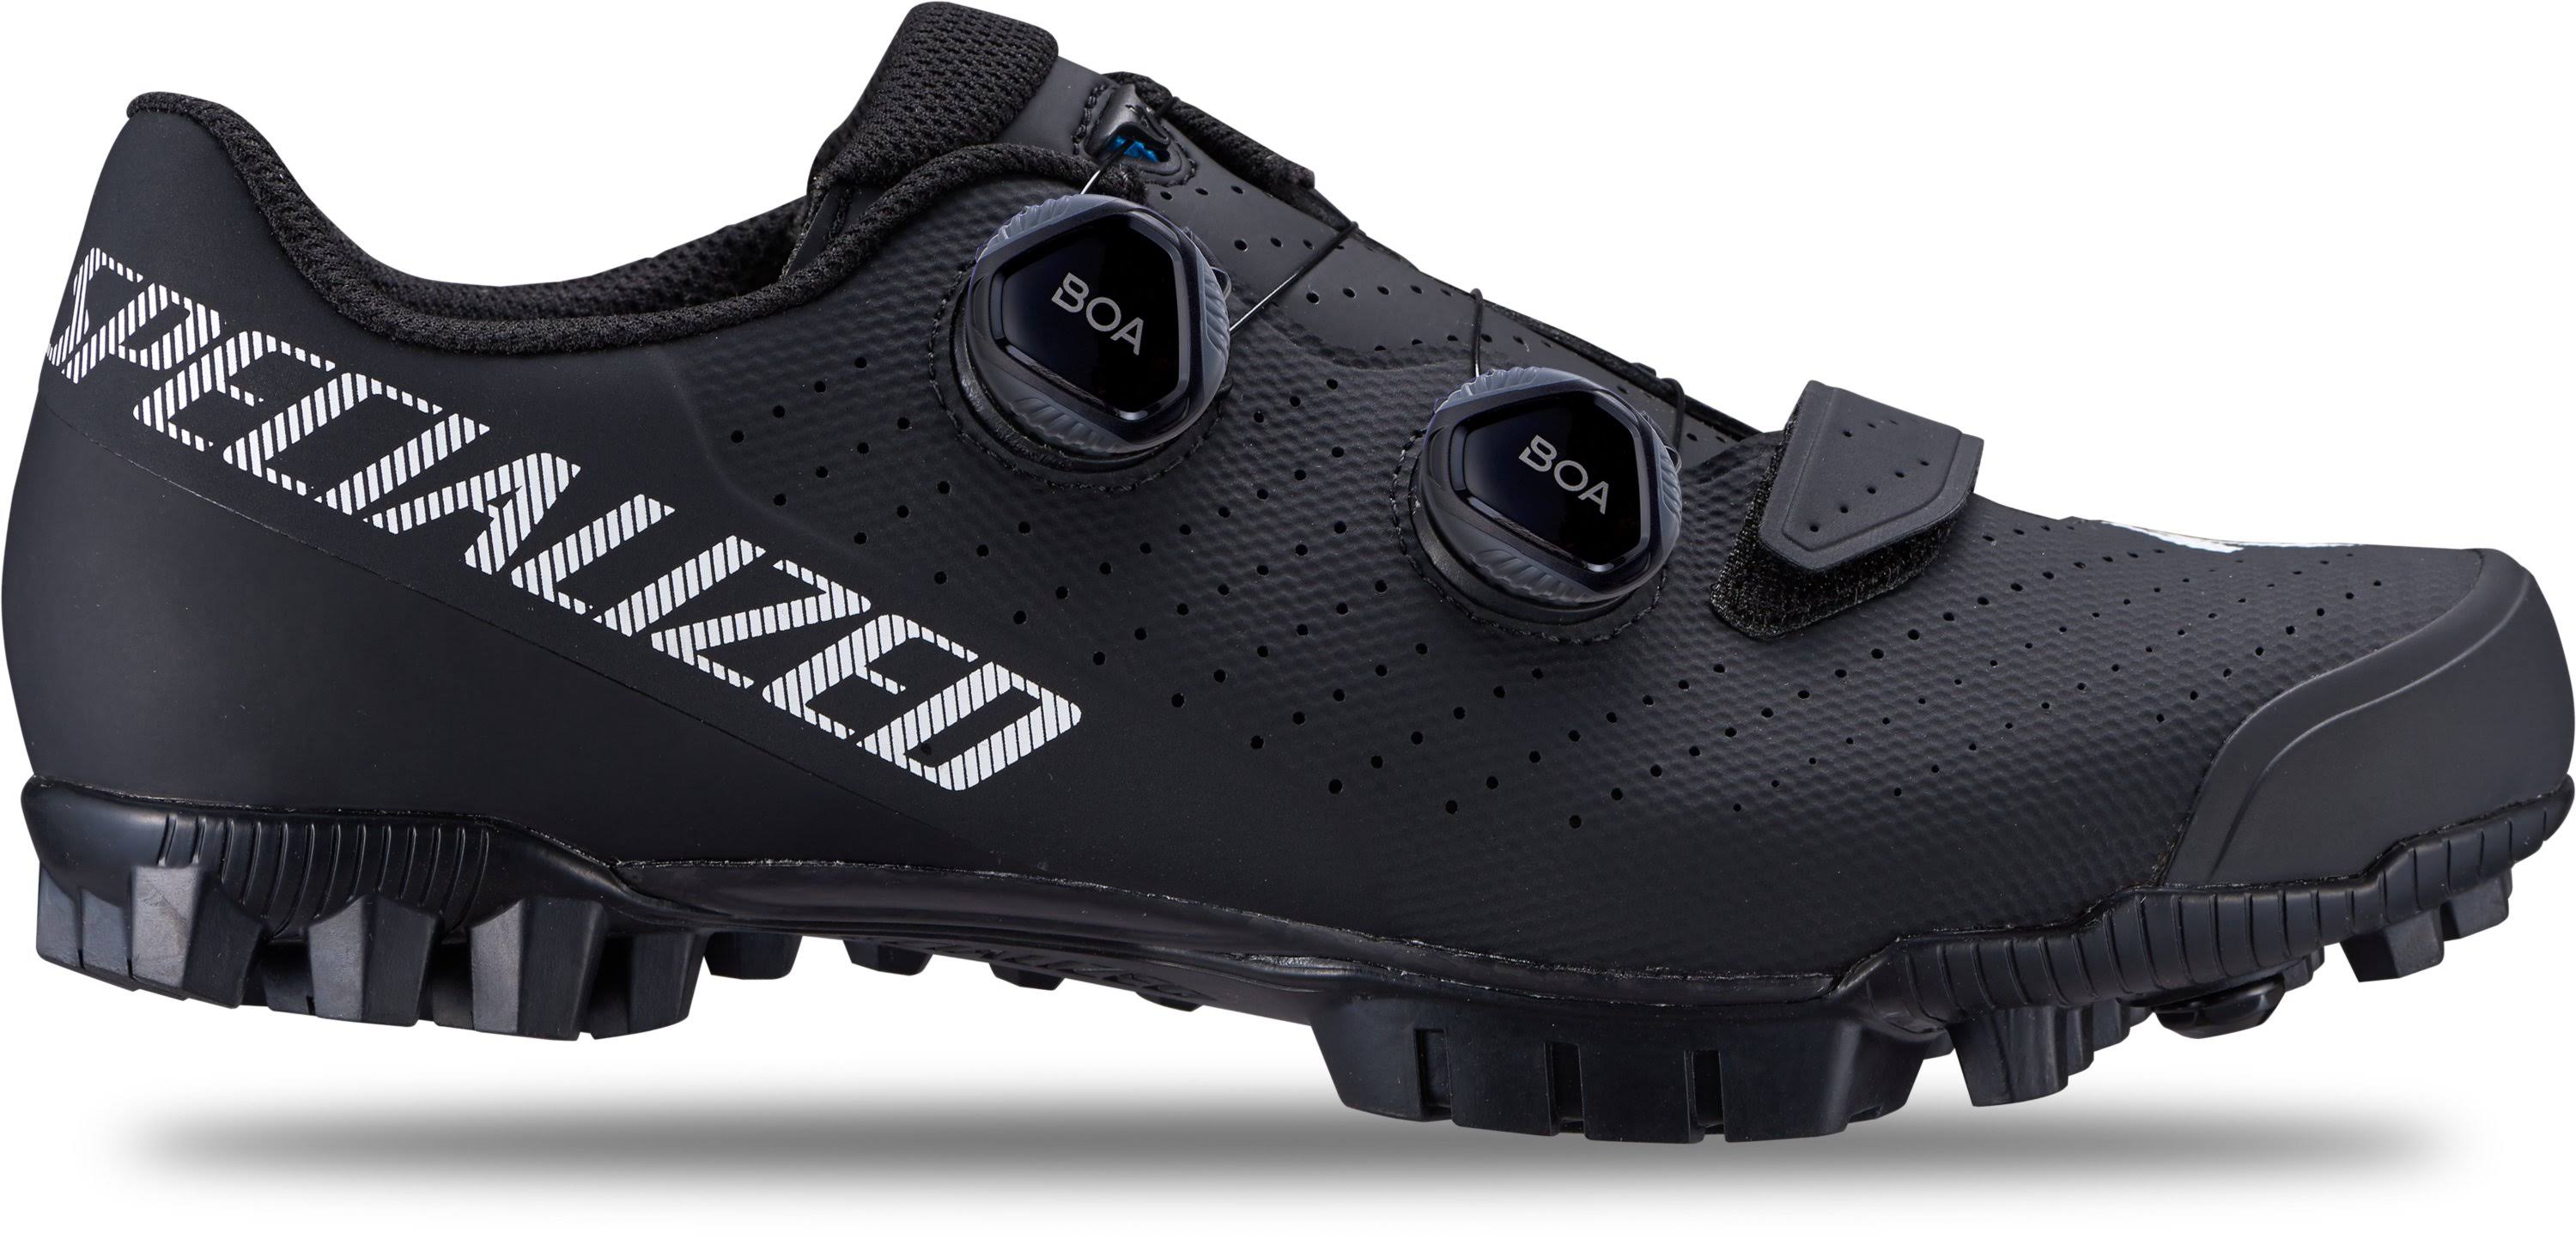 Specialized Recon 1.0 Mountain Bike Shoes - Black - 38